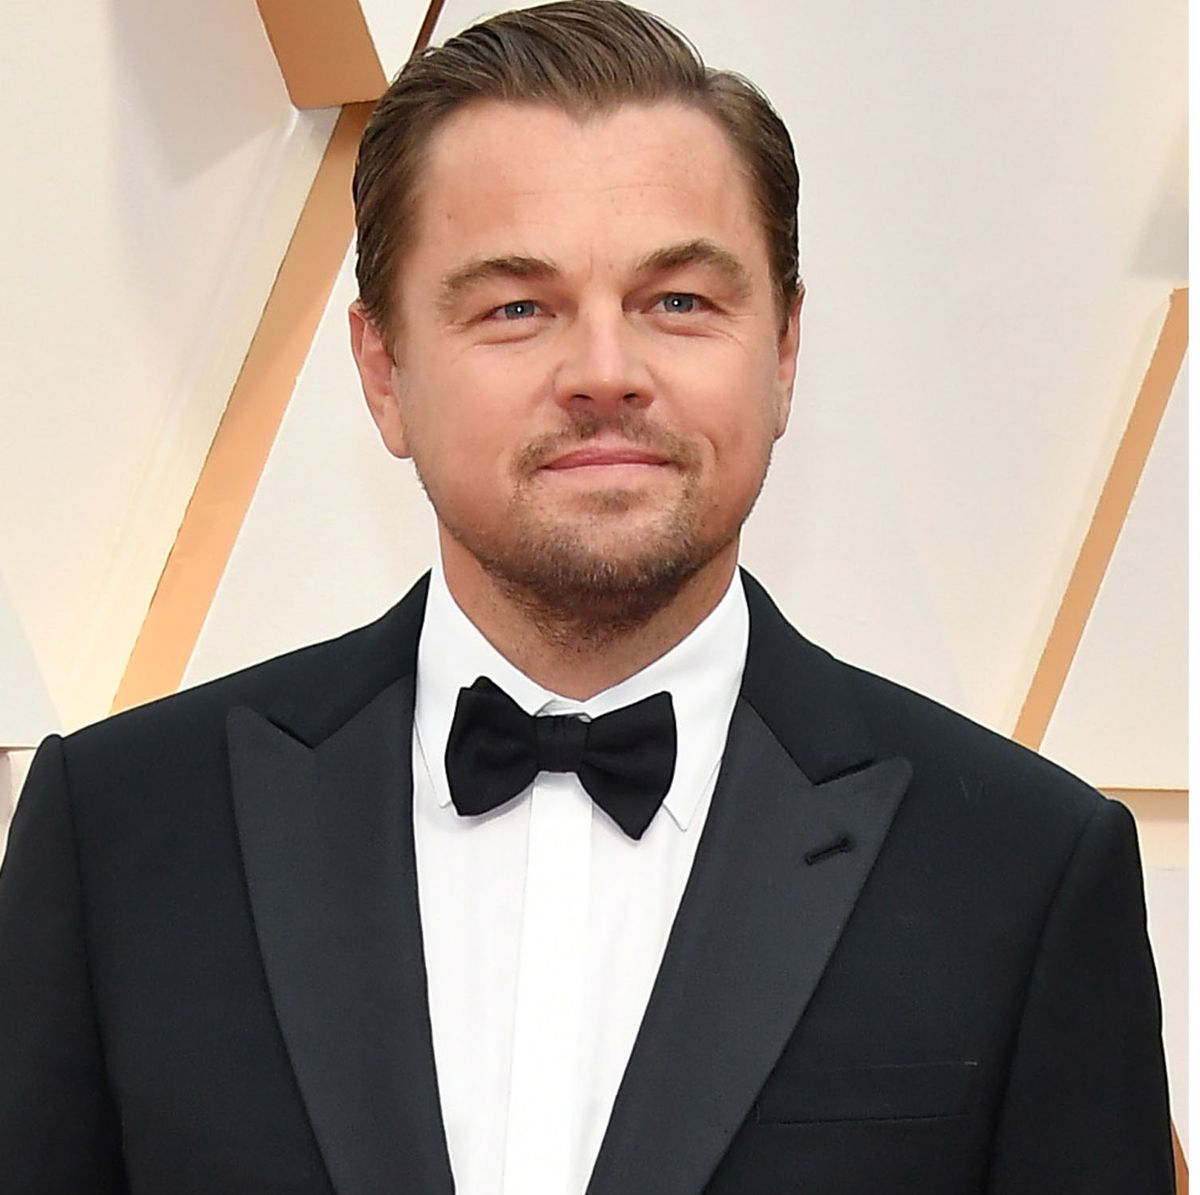 Leonardo dicaprio Hairstyles to choose from- Hair evolution from 1989 to 2024 Top Beauty Magazines